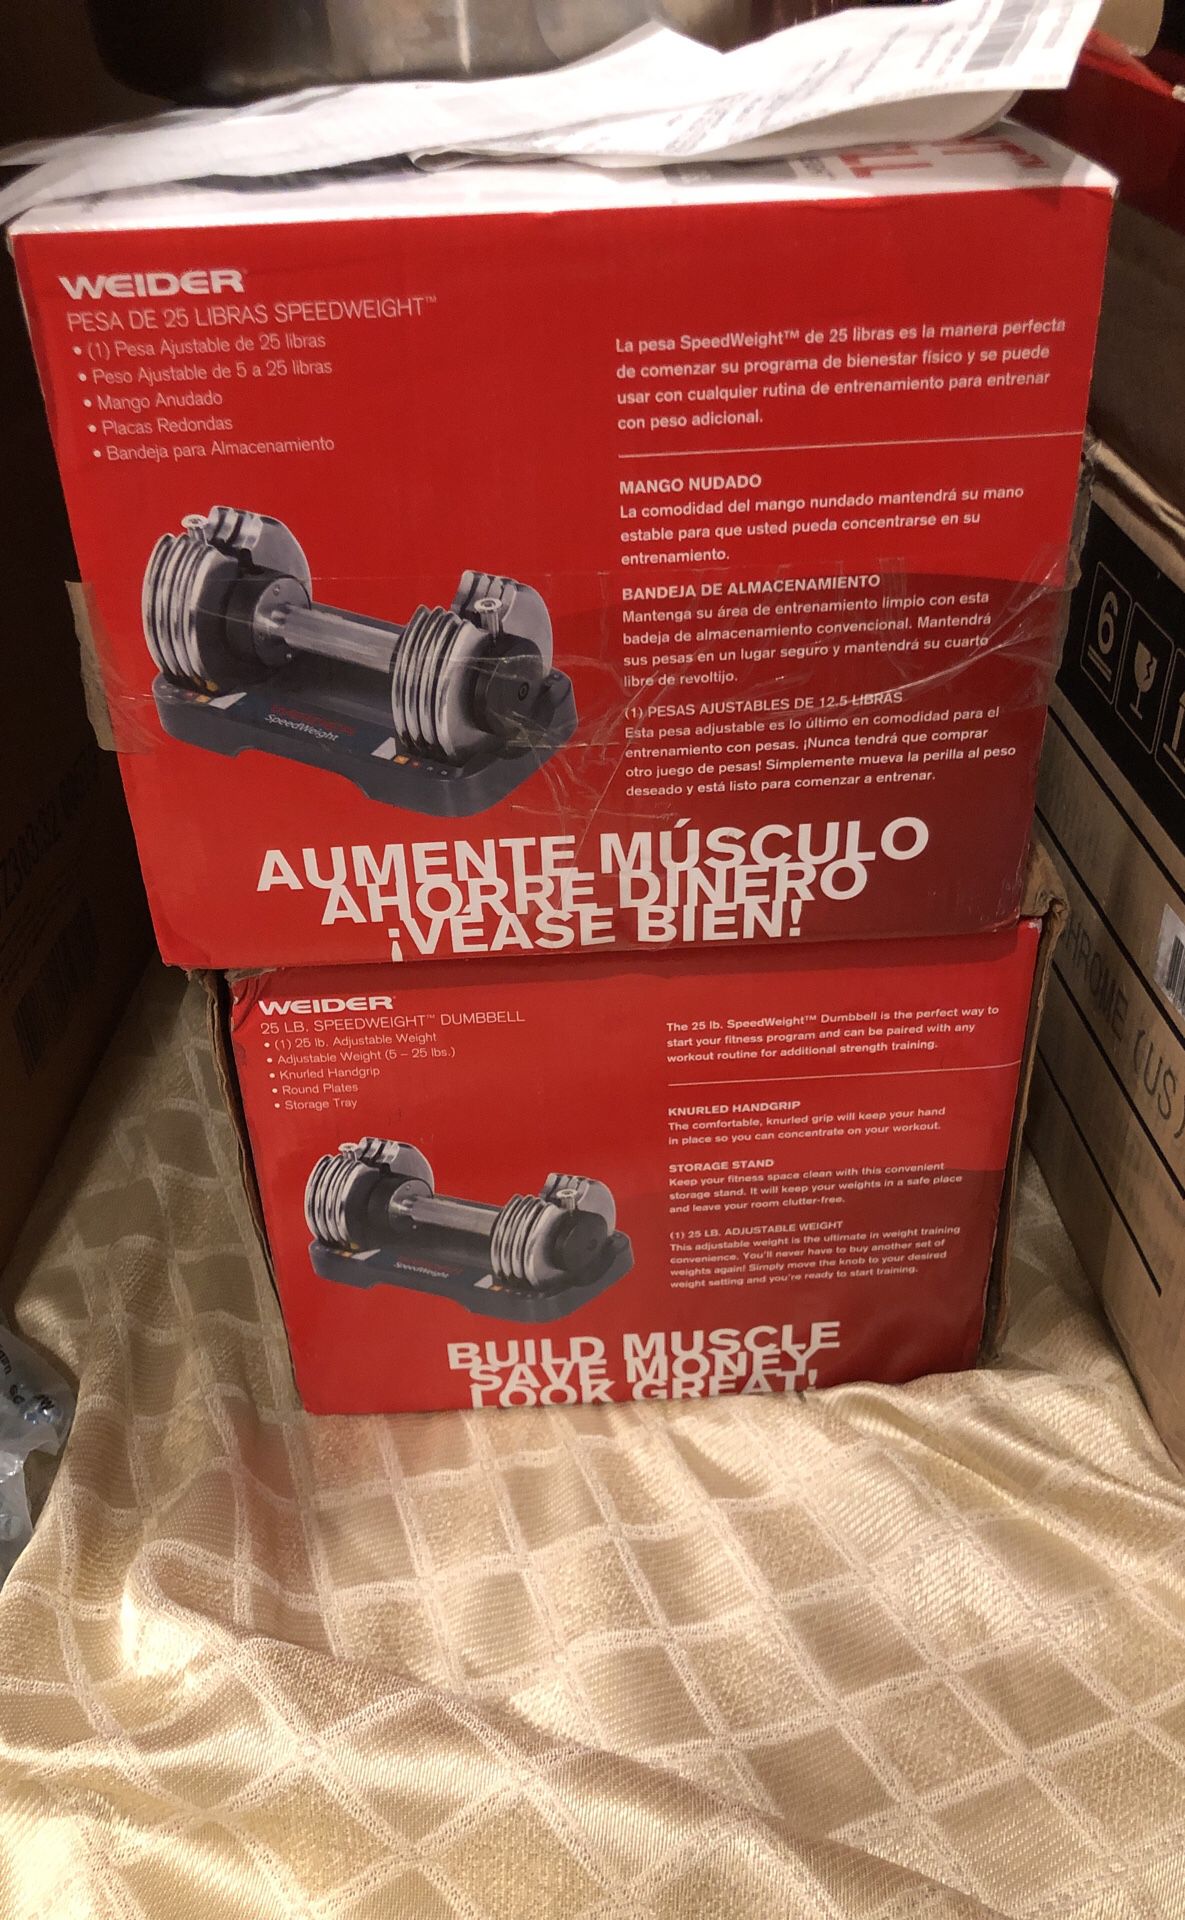 Two adjustable weights 5-25 Ibs. (Never used it)